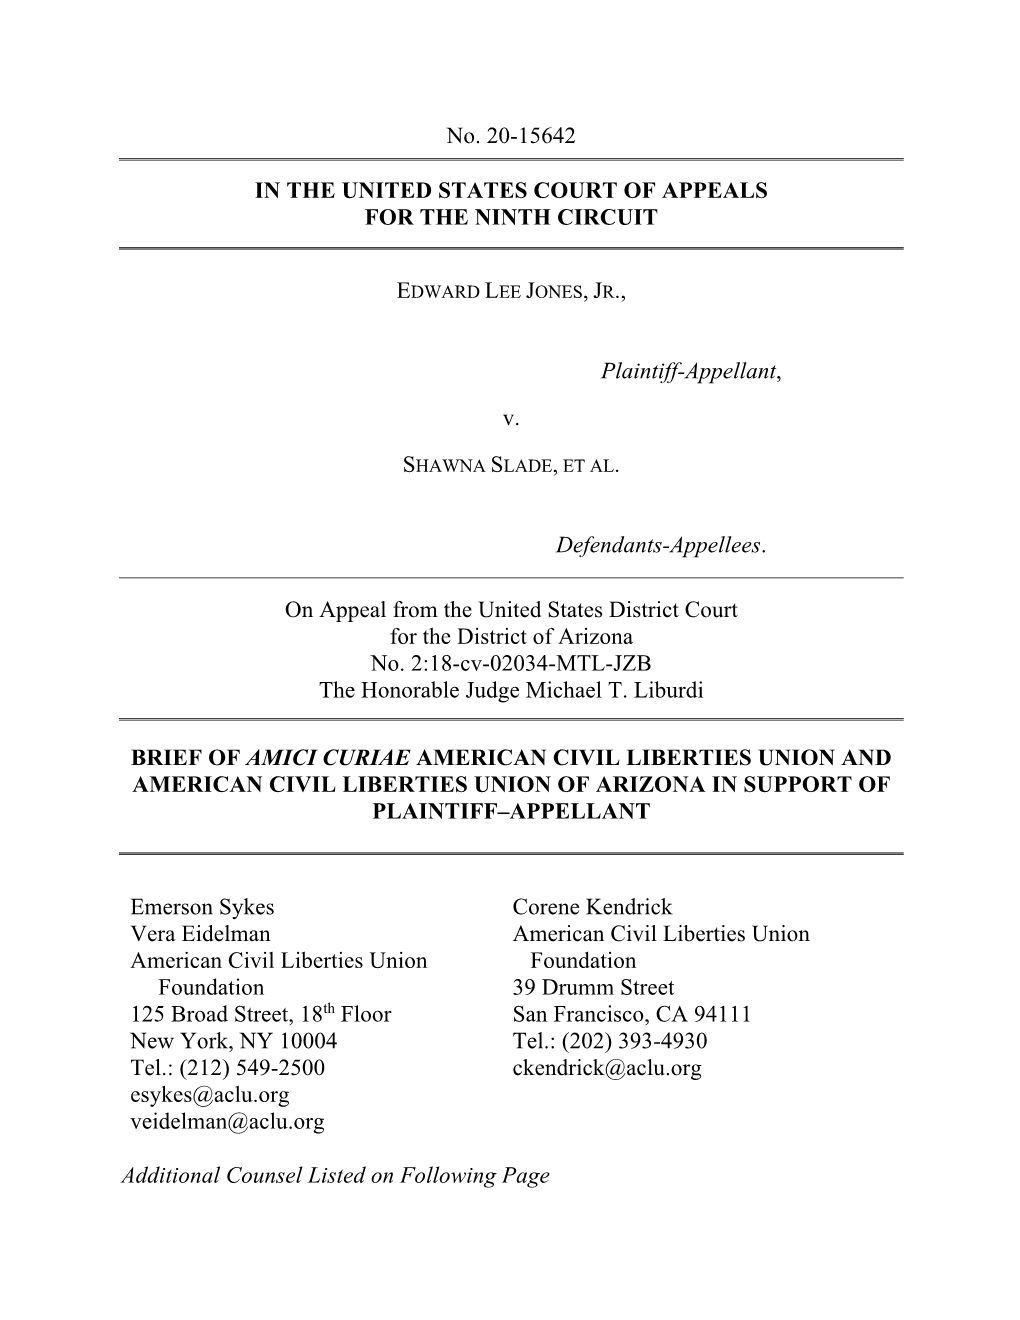 No. 20-15642 in the UNITED STATES COURT of APPEALS